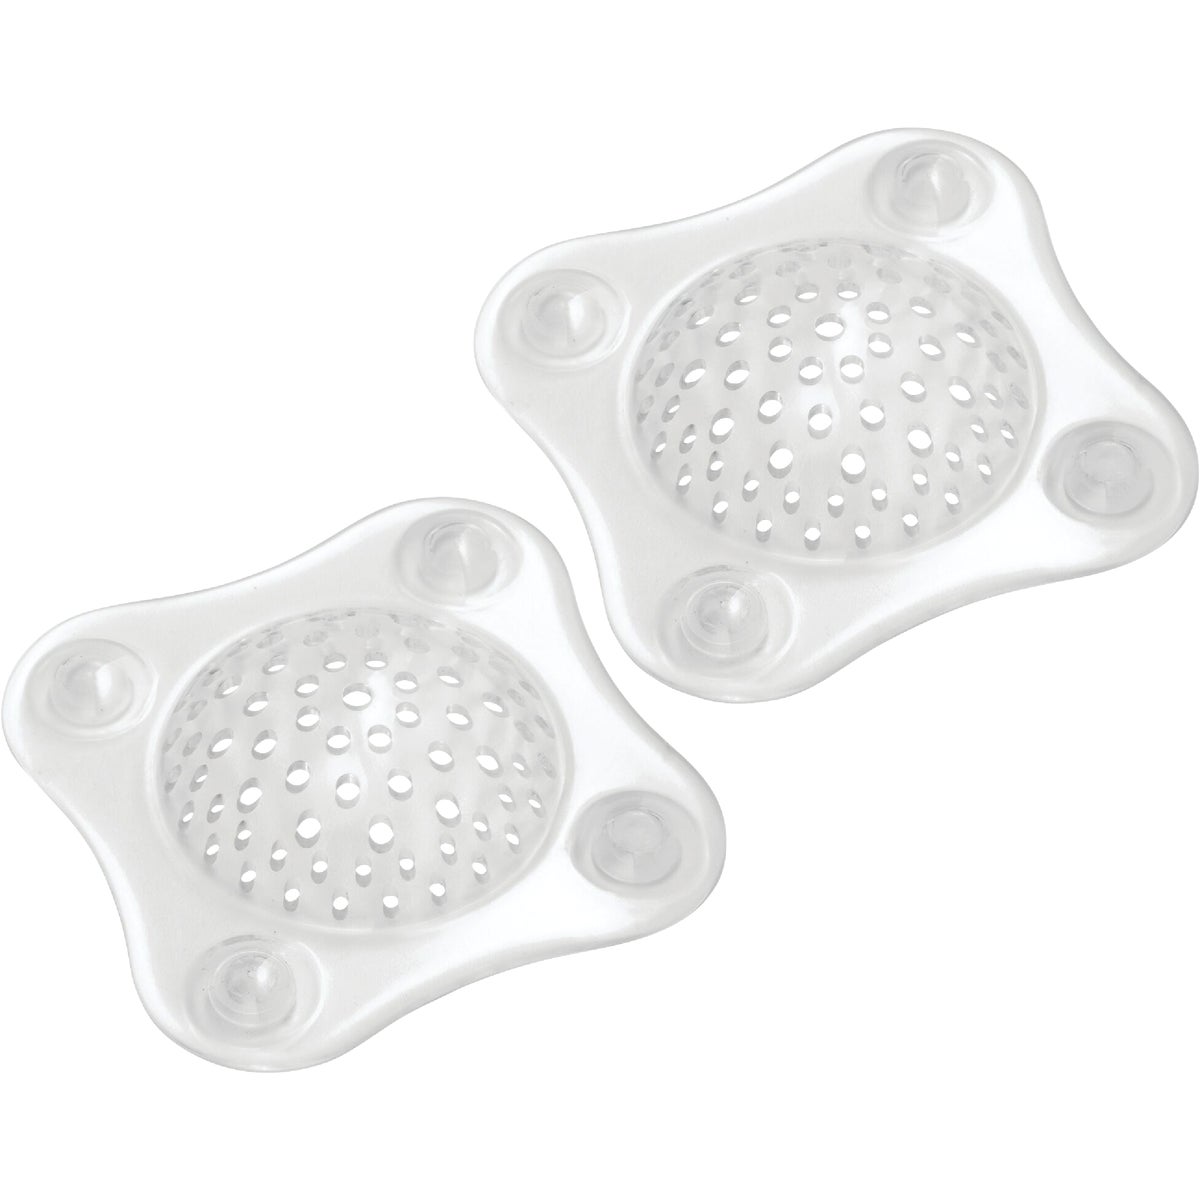 iDesign 5.5 In. Shower Drain Protector